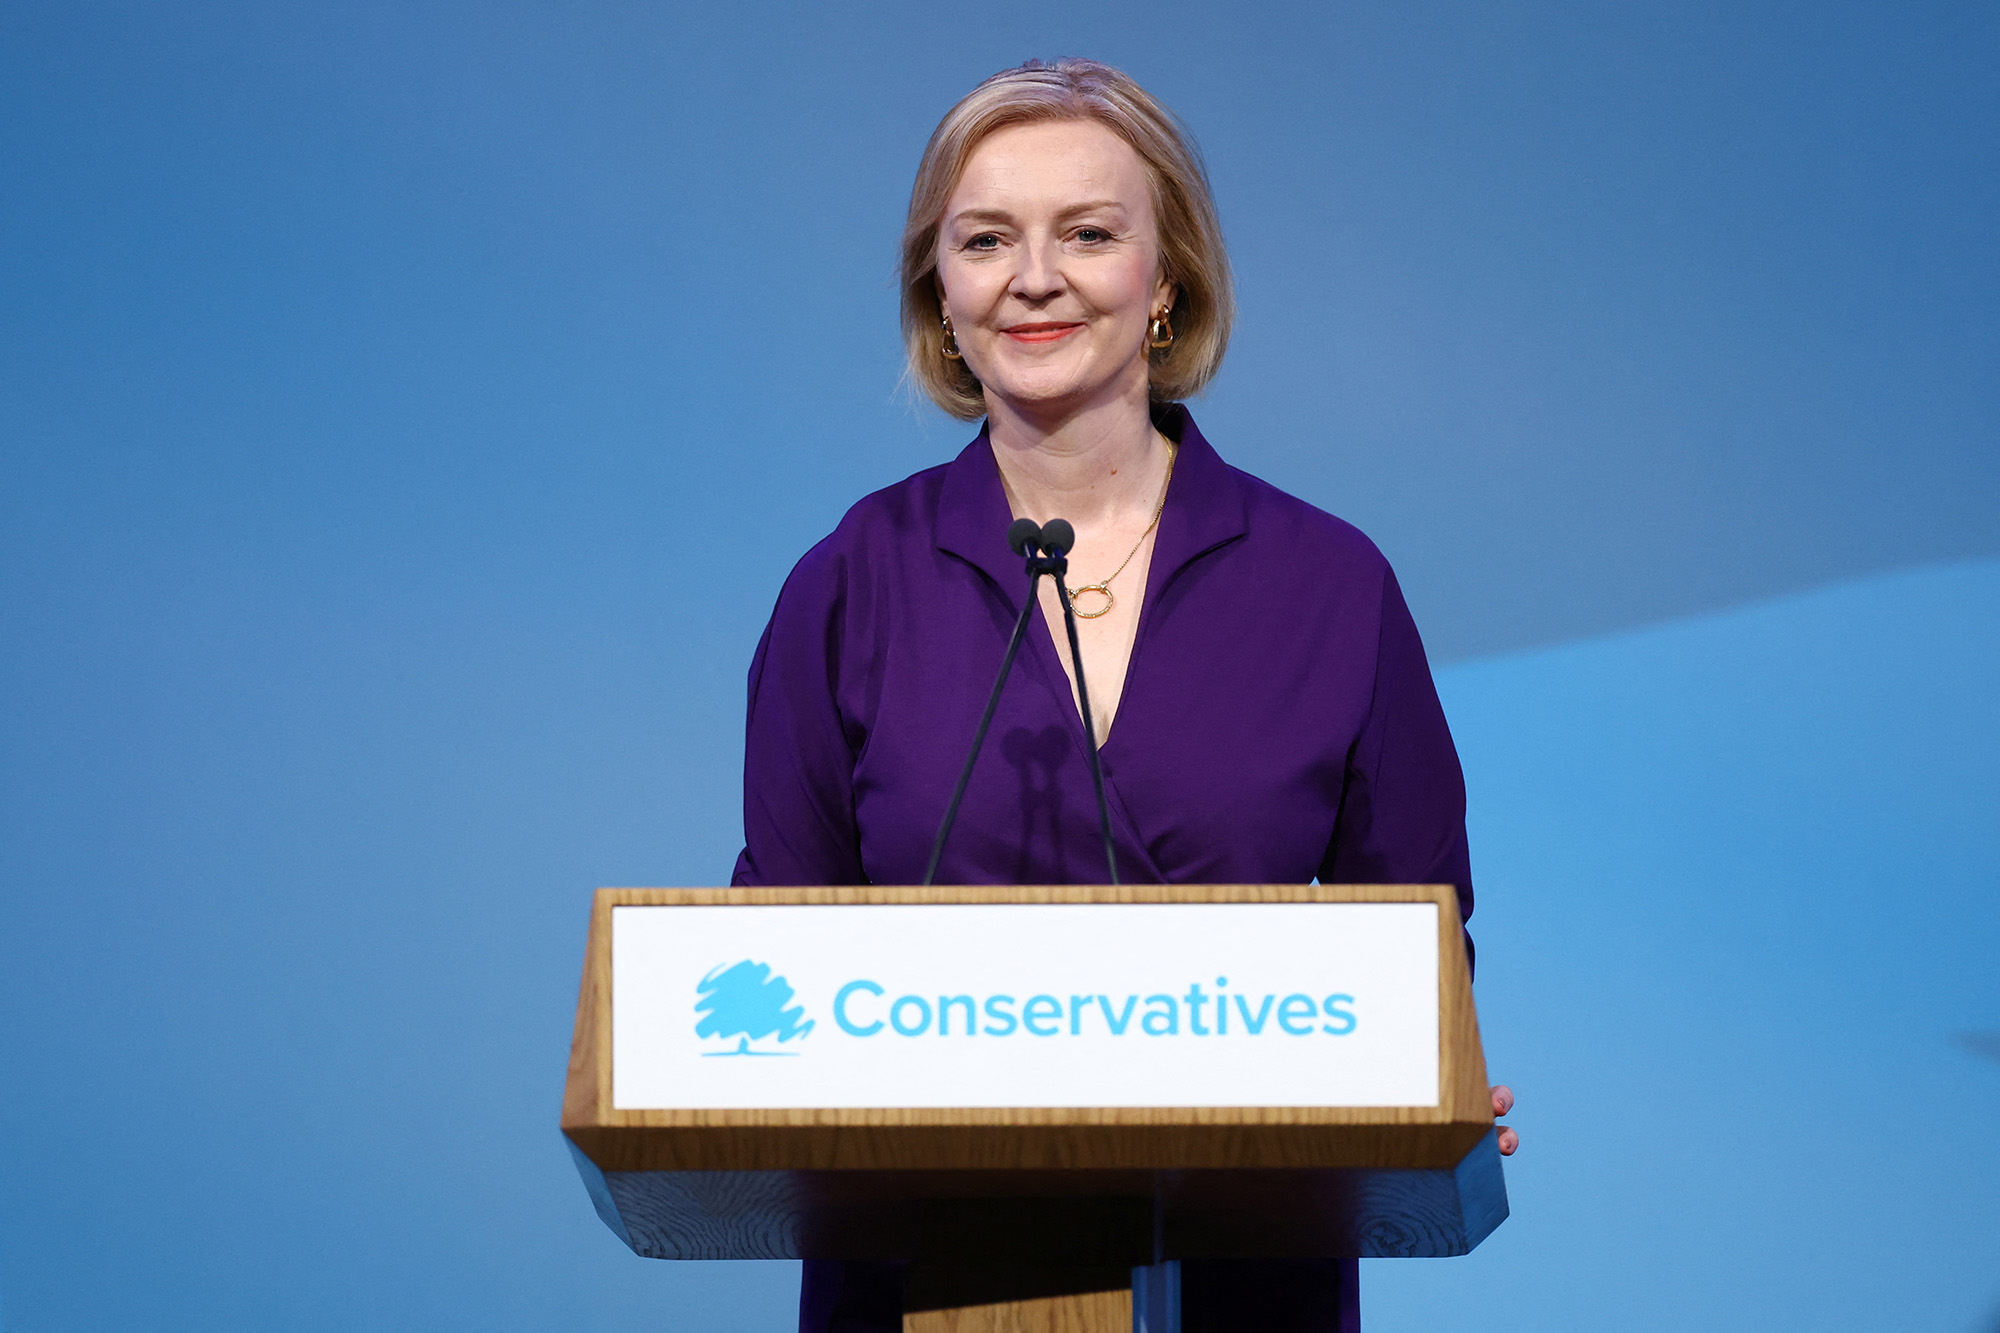 Liz Truss speaks after being announced as Britain's next Prime Minister at The Queen Elizabeth II Centre in London, Britain, on September 5.